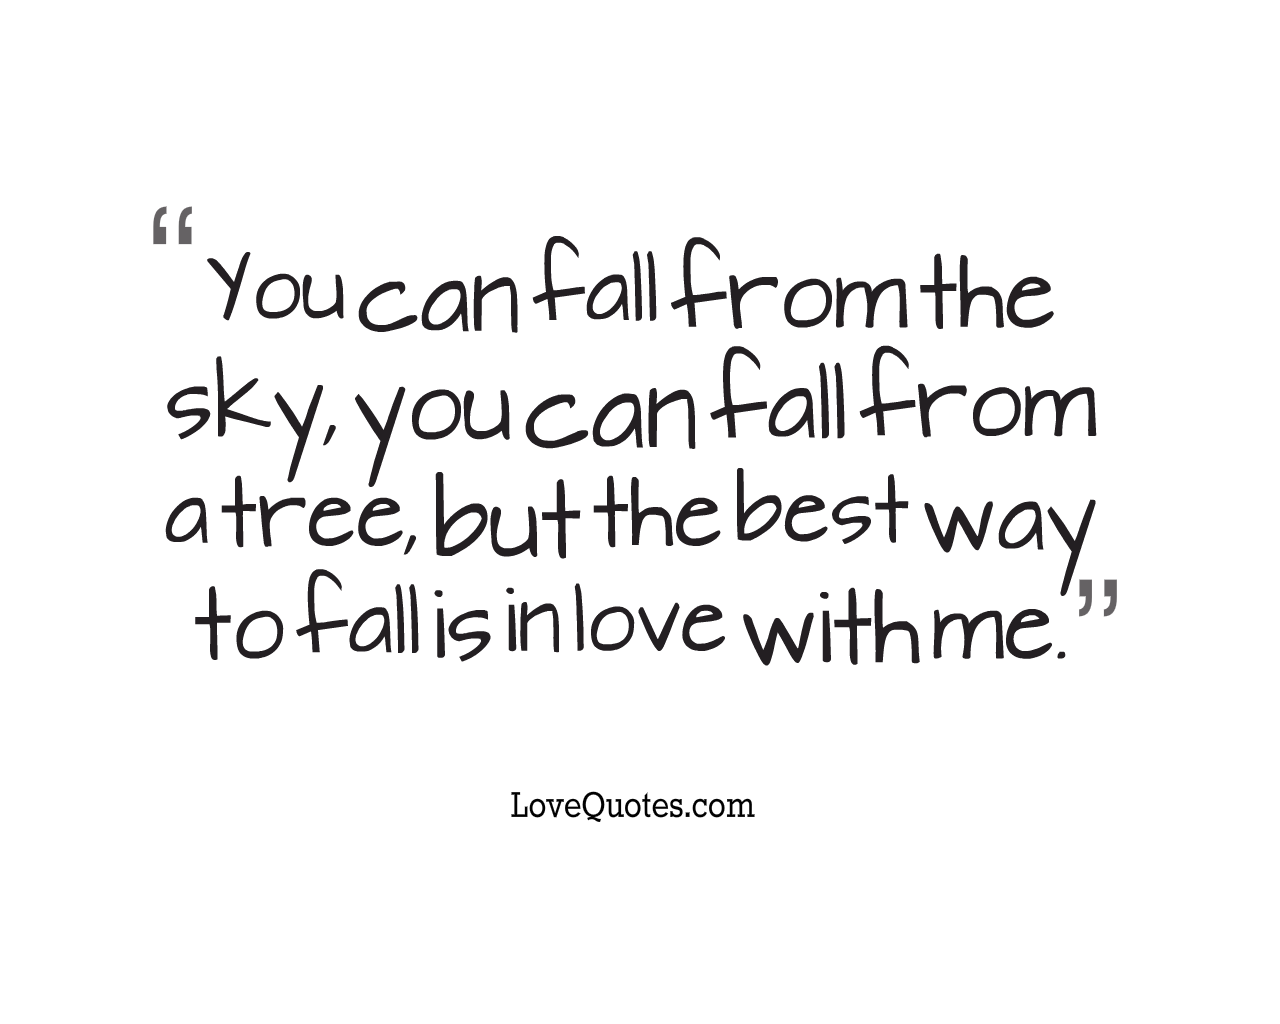 Fall In Love With Me